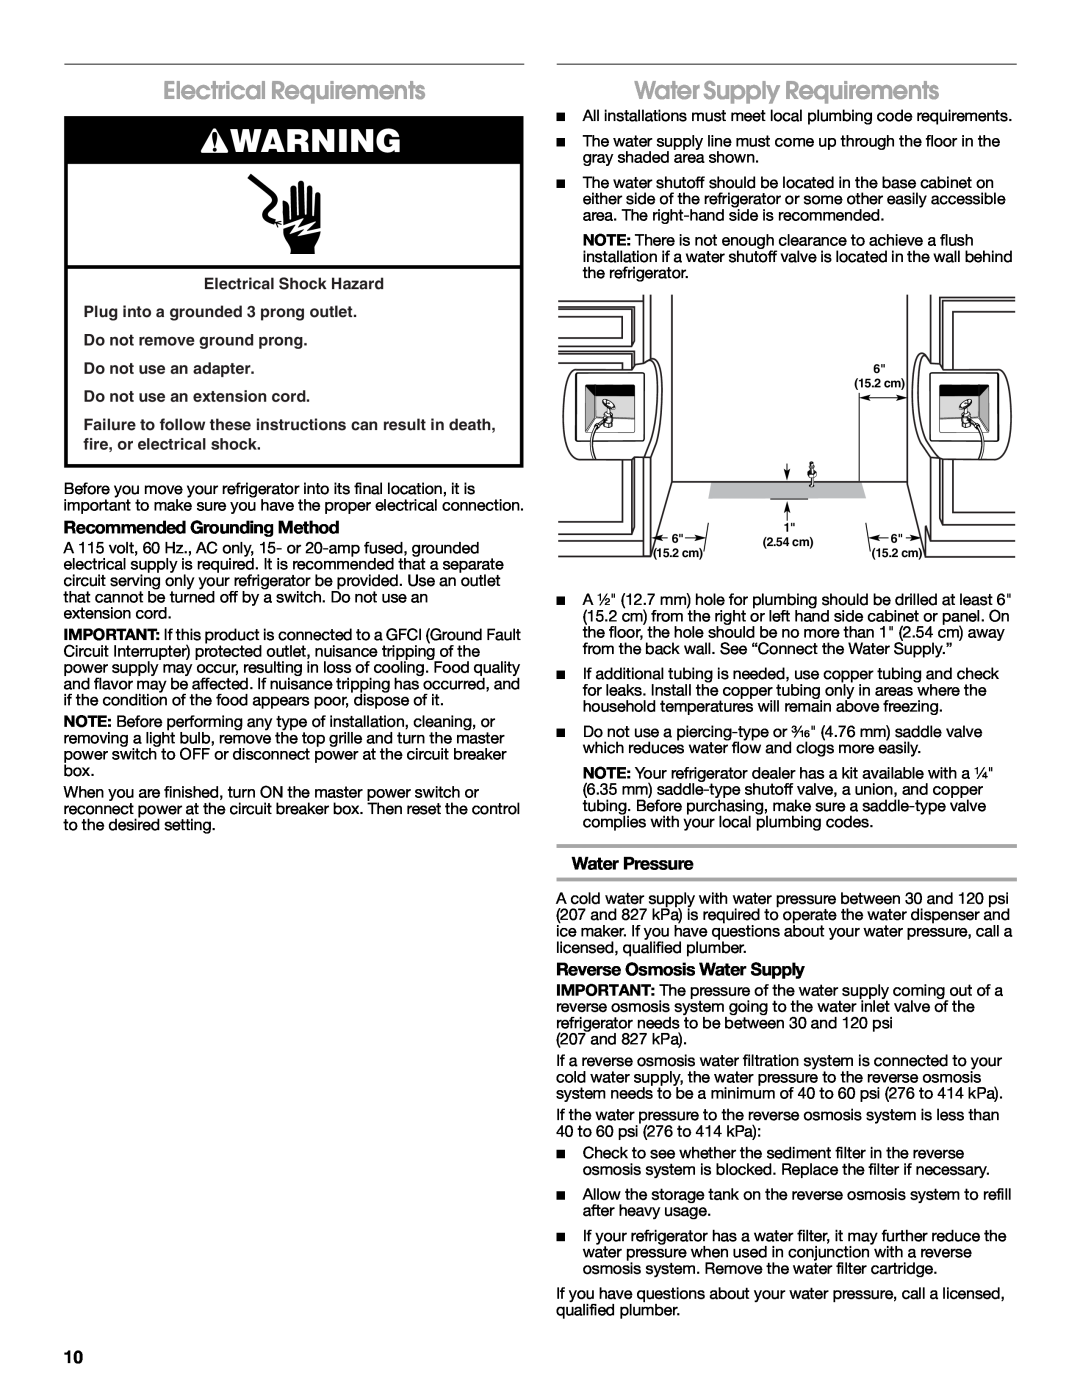 Jenn-Air W10379137A Electrical Requirements, Recommended Grounding Method, Water Pressure, Reverse Osmosis Water Supply 